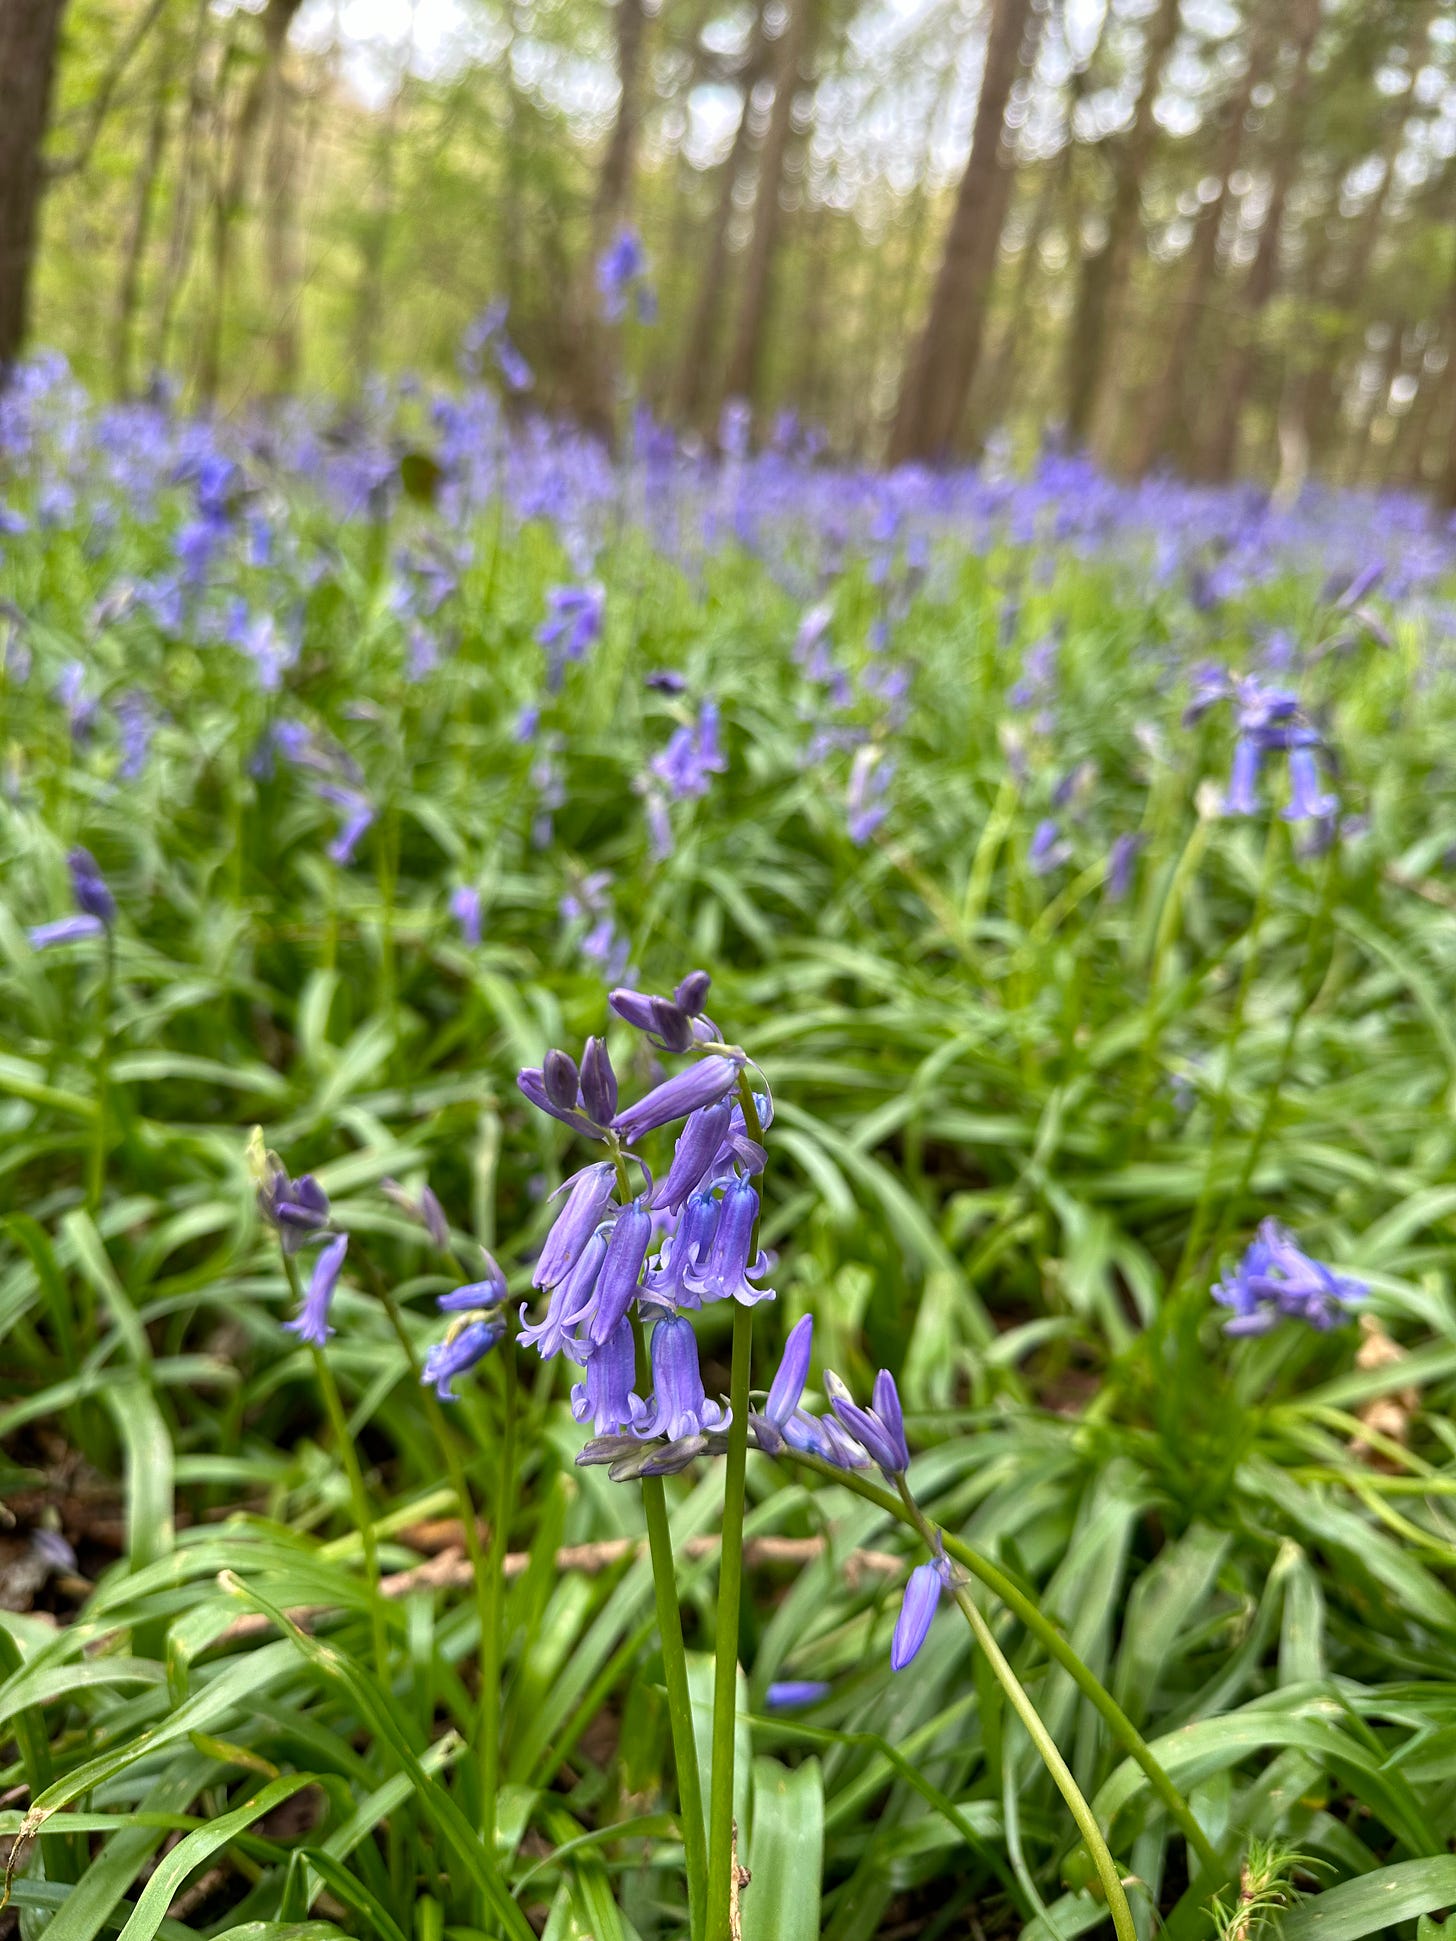 Image shows bluebells in a wood